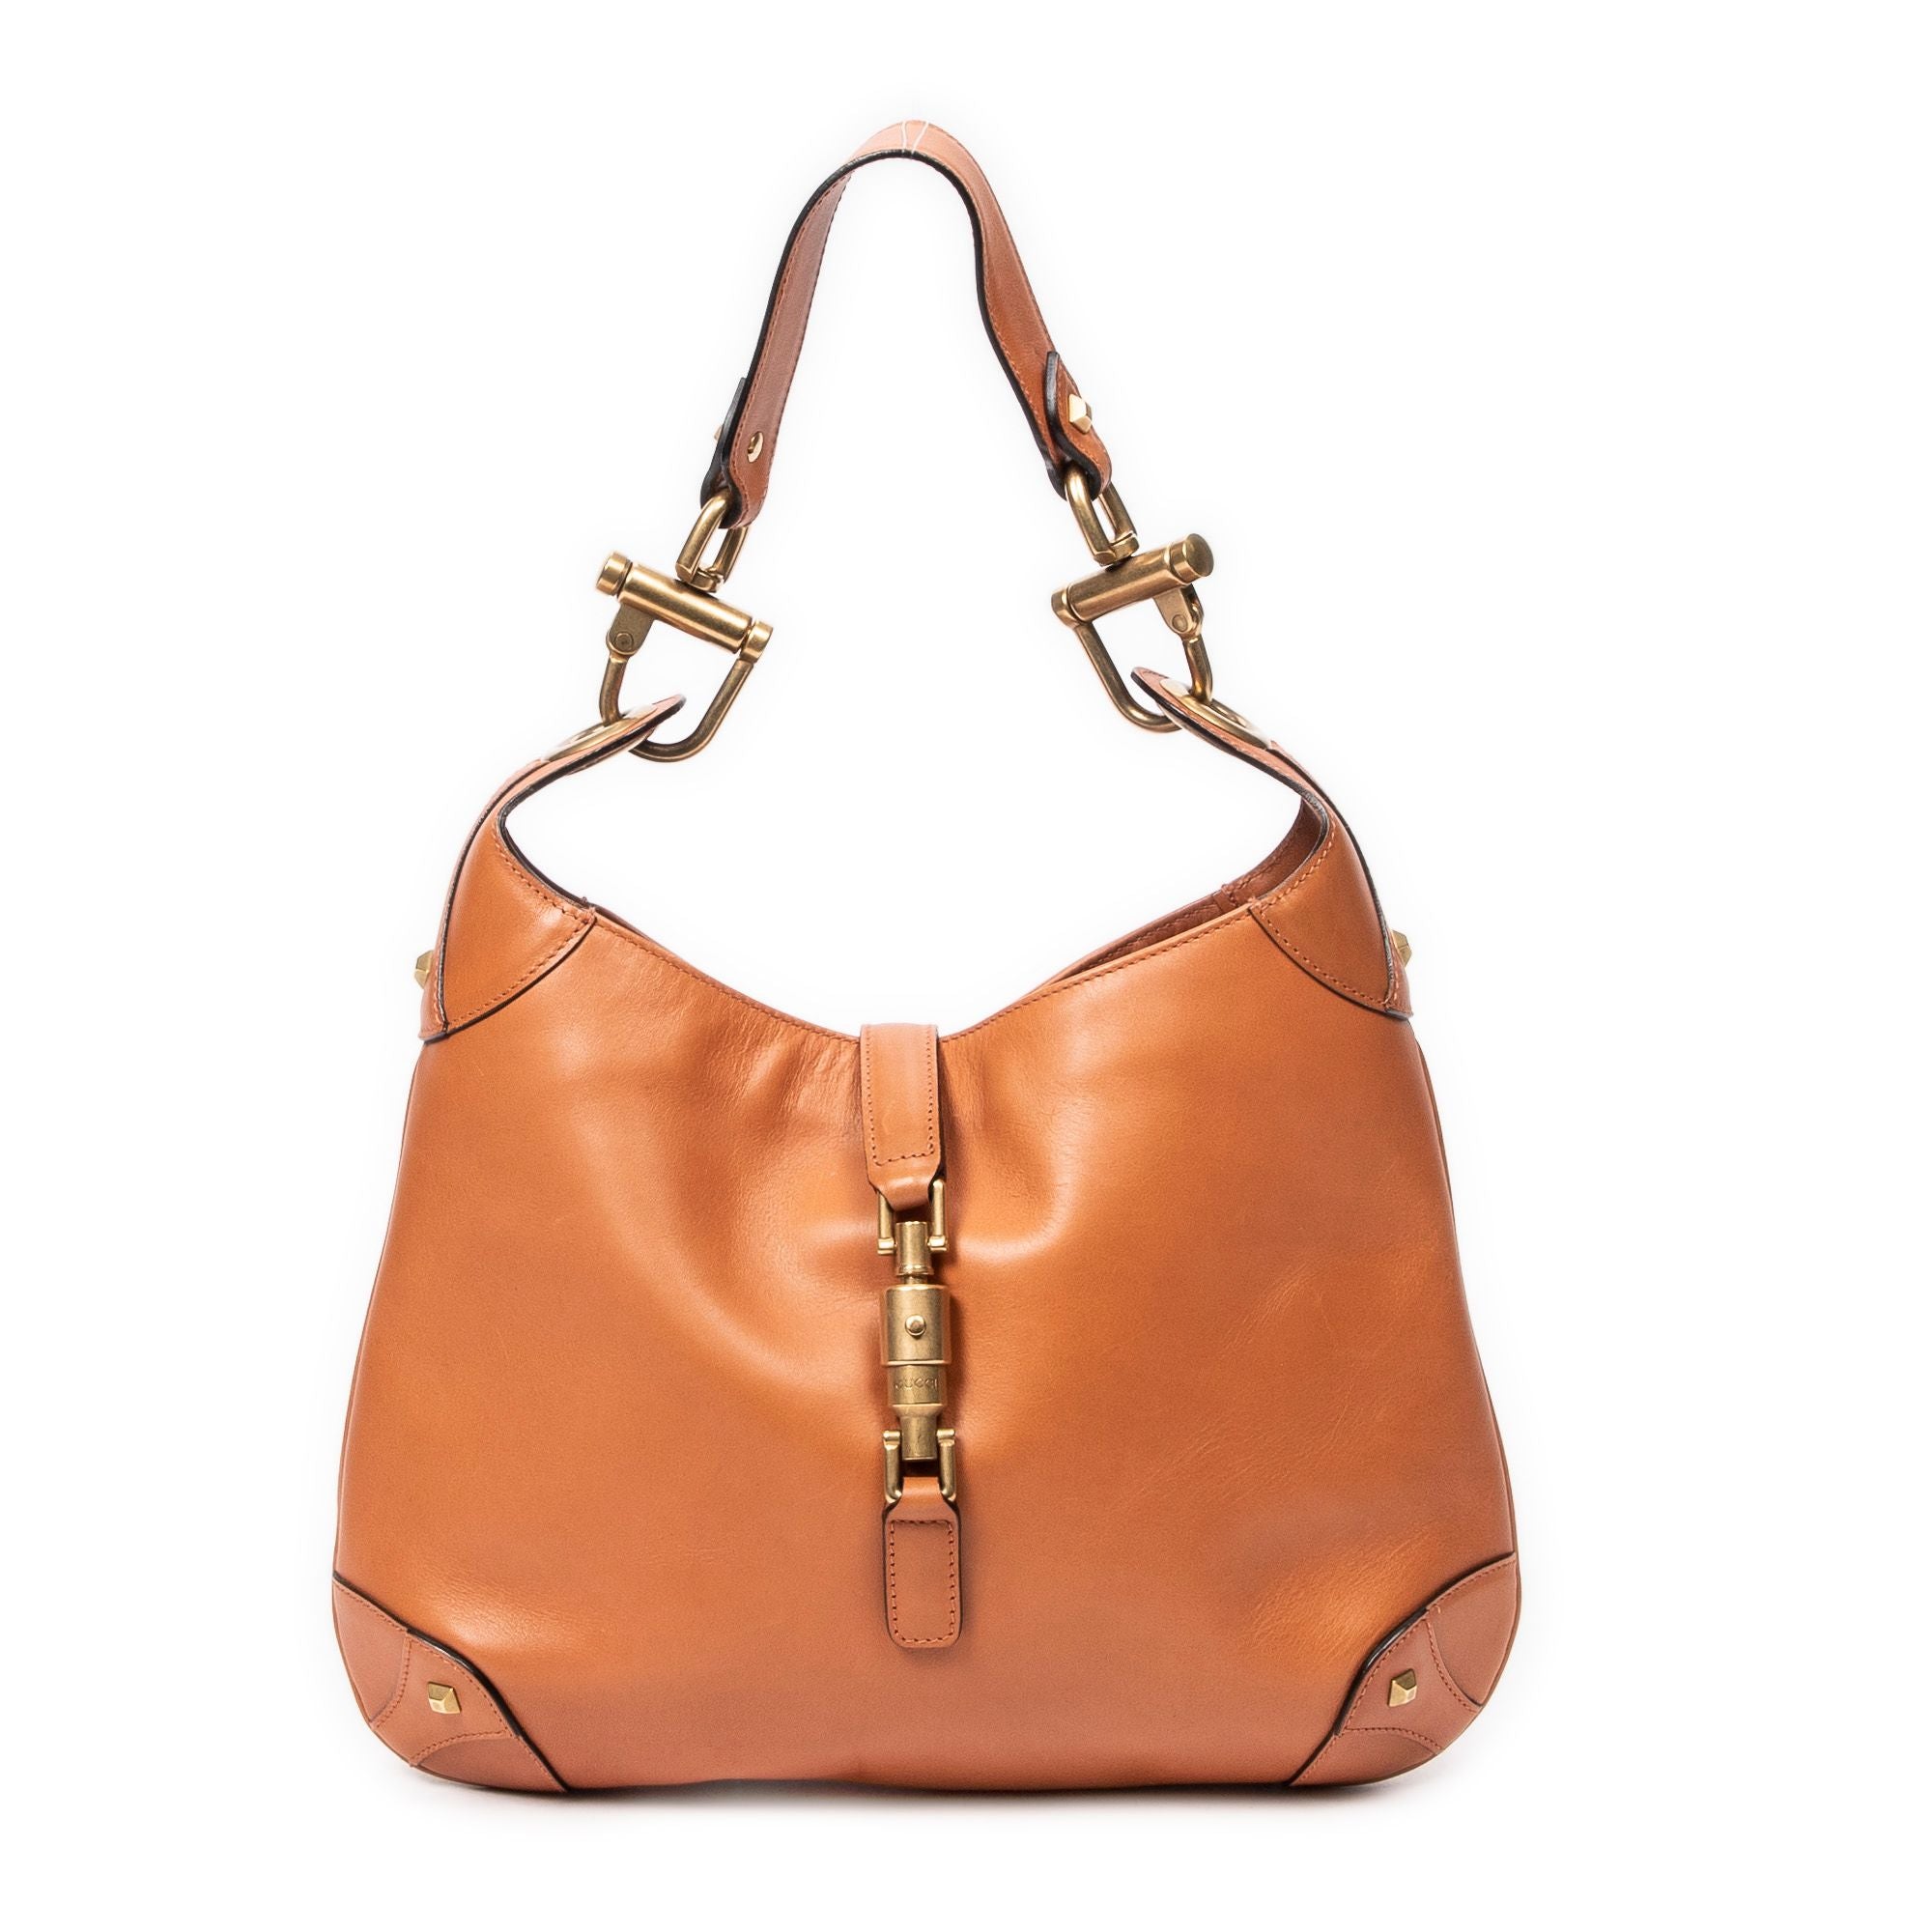 GUCCI Gucci Jackie Small Vintage Leather Hobo Bag in Tan - Vault 55